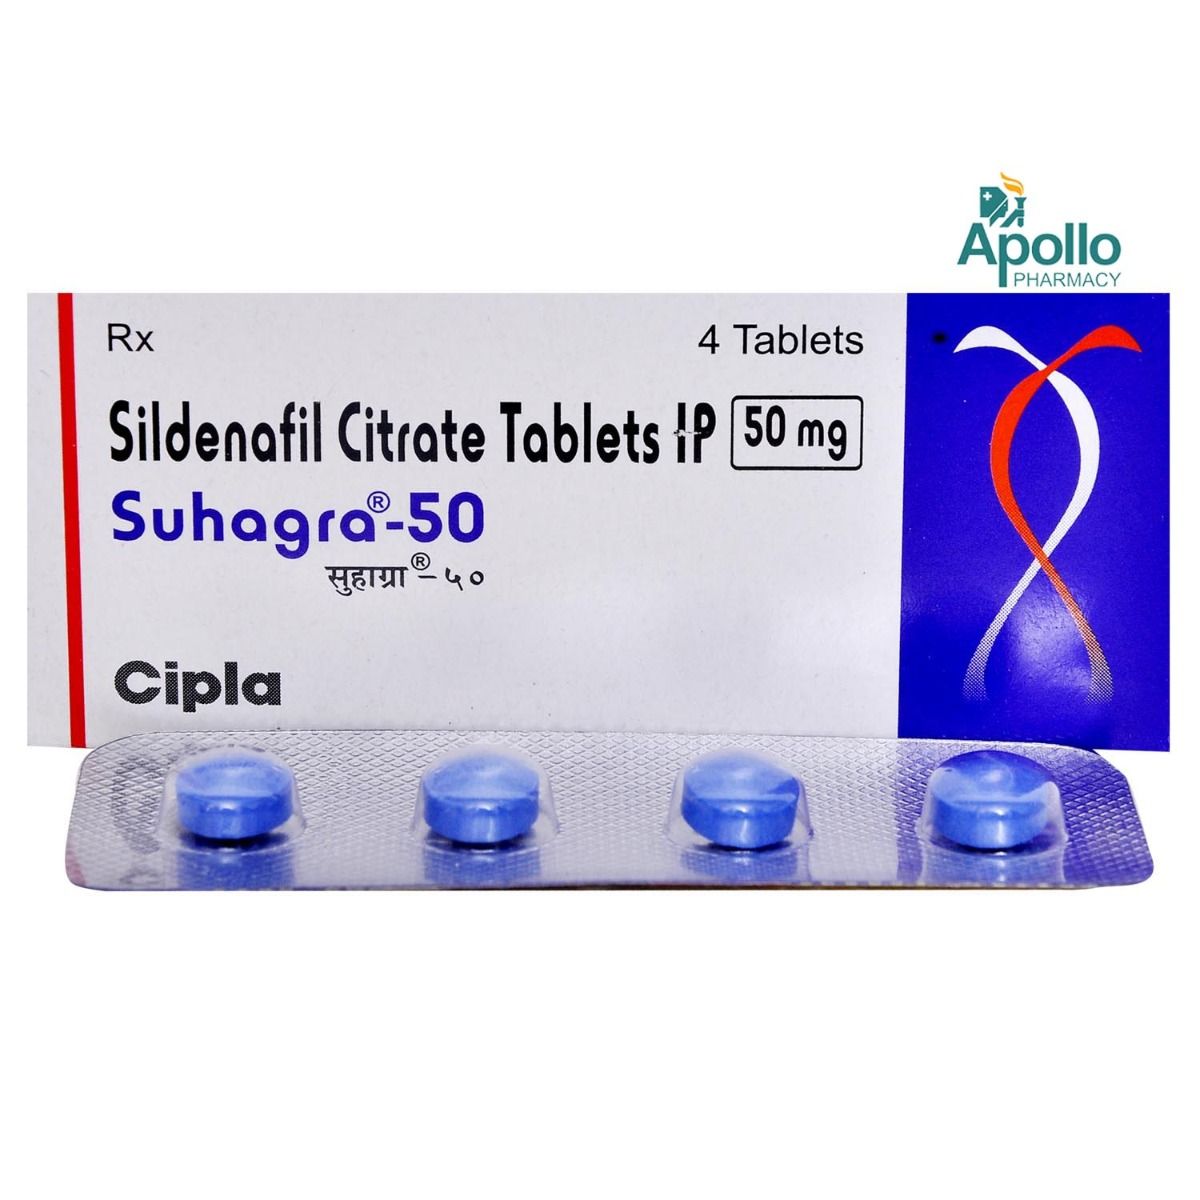 Suhagra-50 Tablet 4's, Pack of 4 TABLETS